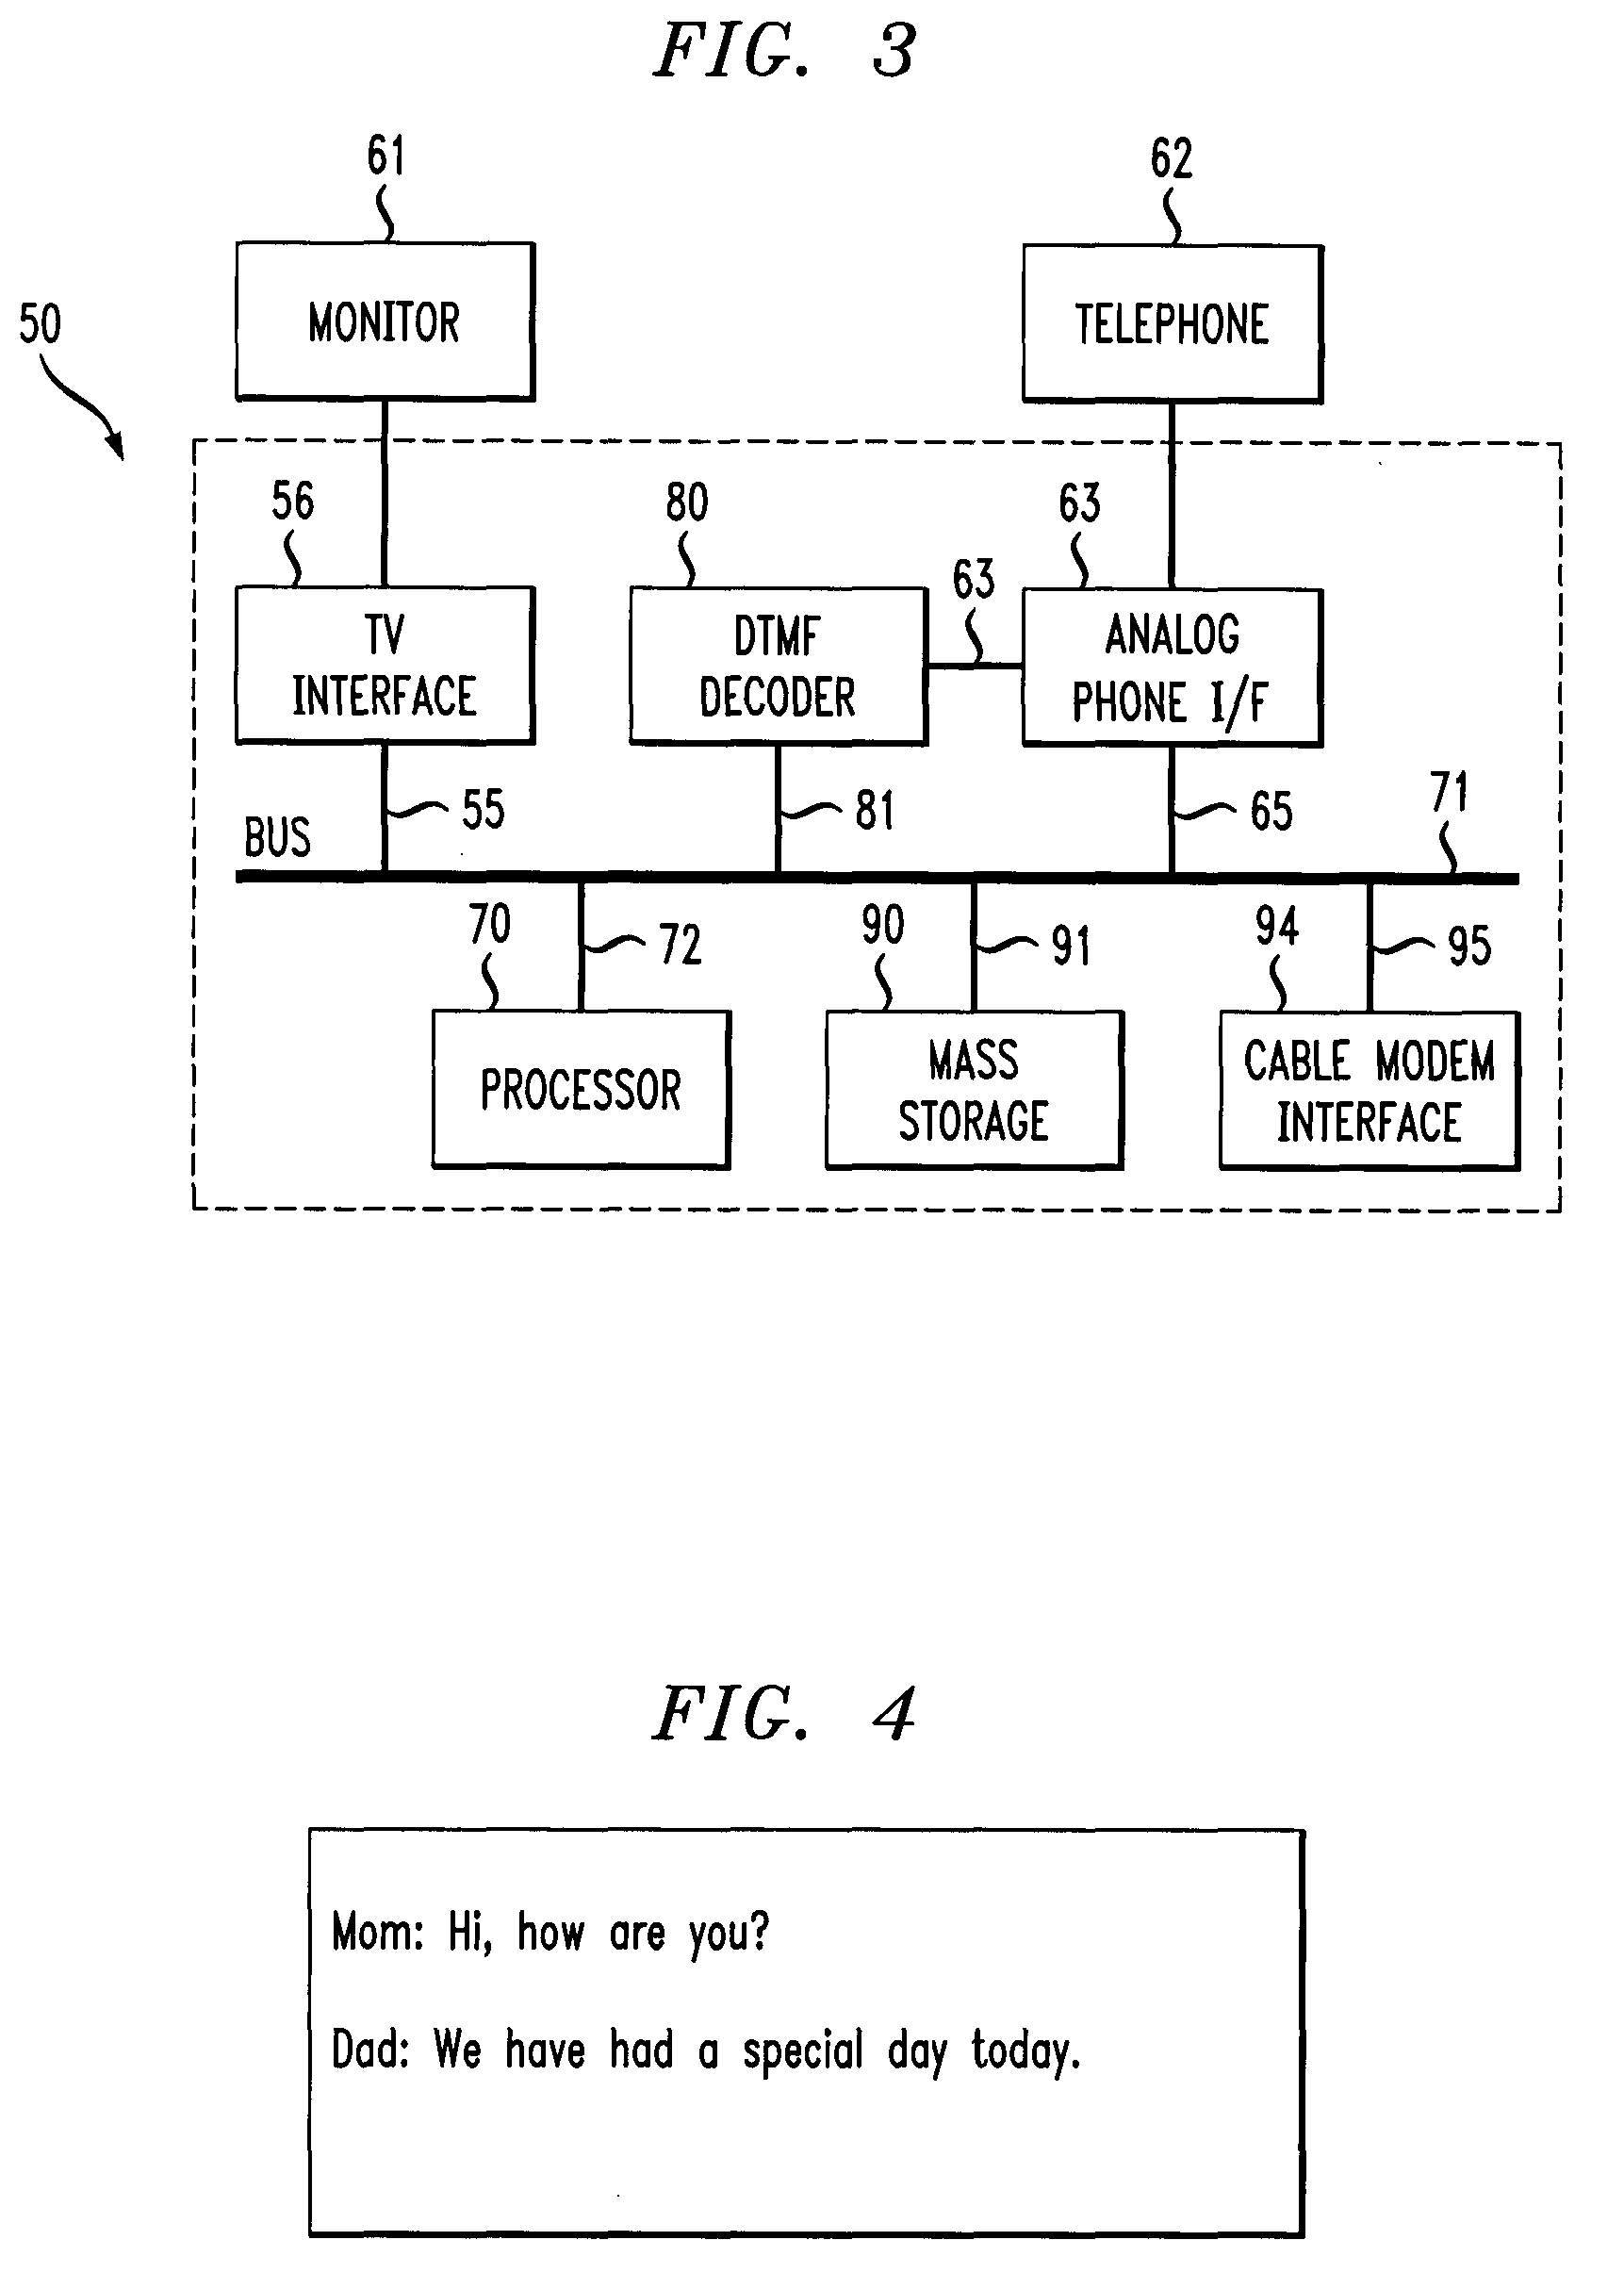 Method and Device for Providing Speech-to-Text Encoding and Telephony Service